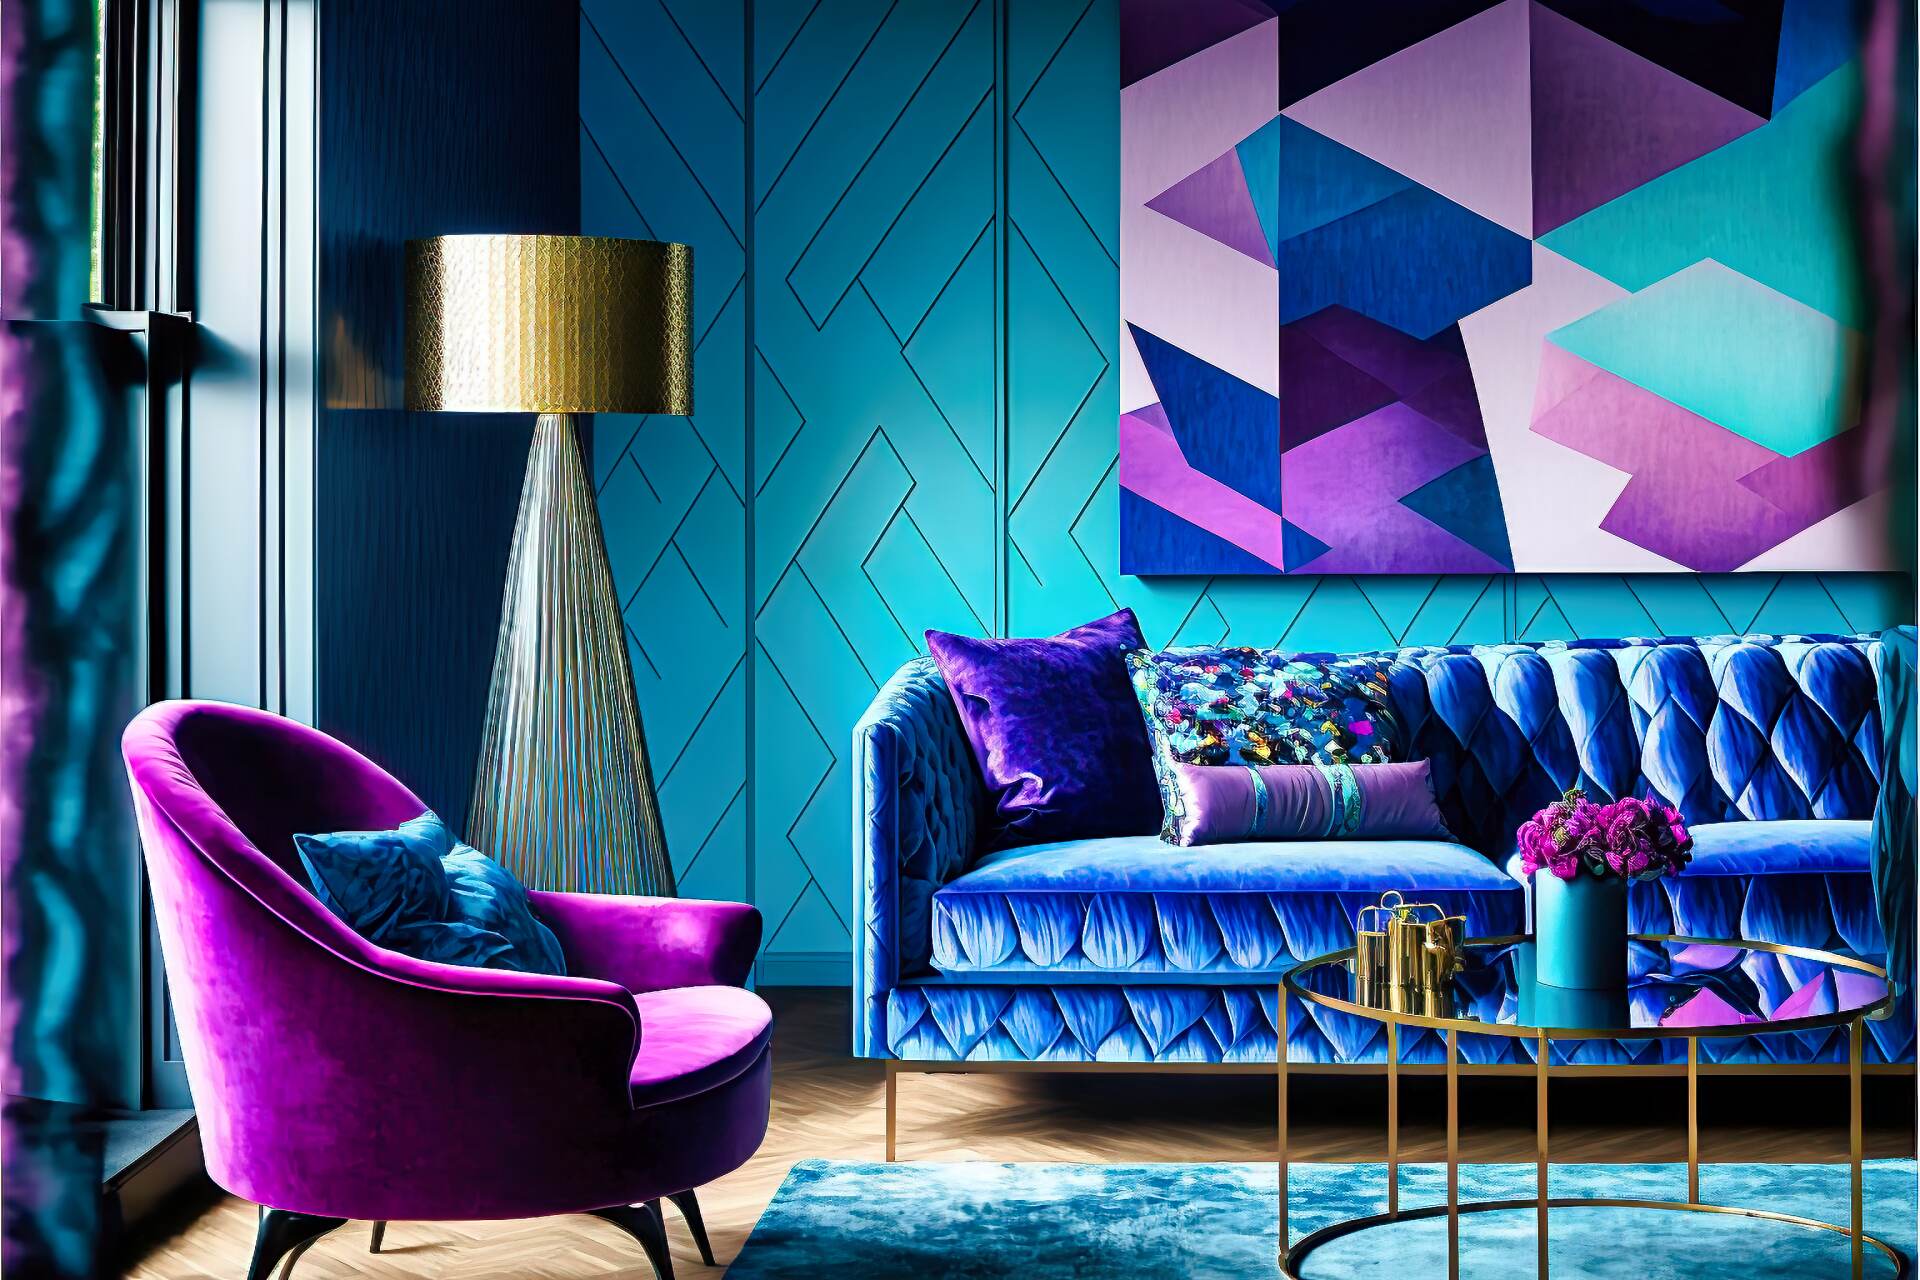 A Modern Living Room In Bright Shades Of Blue And Purple, With A Unique Feature Wall Covered In Geometric Wallpaper. A Bright Blue Velvet Sofa, A Patterned Armchair And A Glass Coffee Table. Colorful Artwork Adorning The Walls, With A Bright Purple Rug And A Tall Lamp In The Corner.